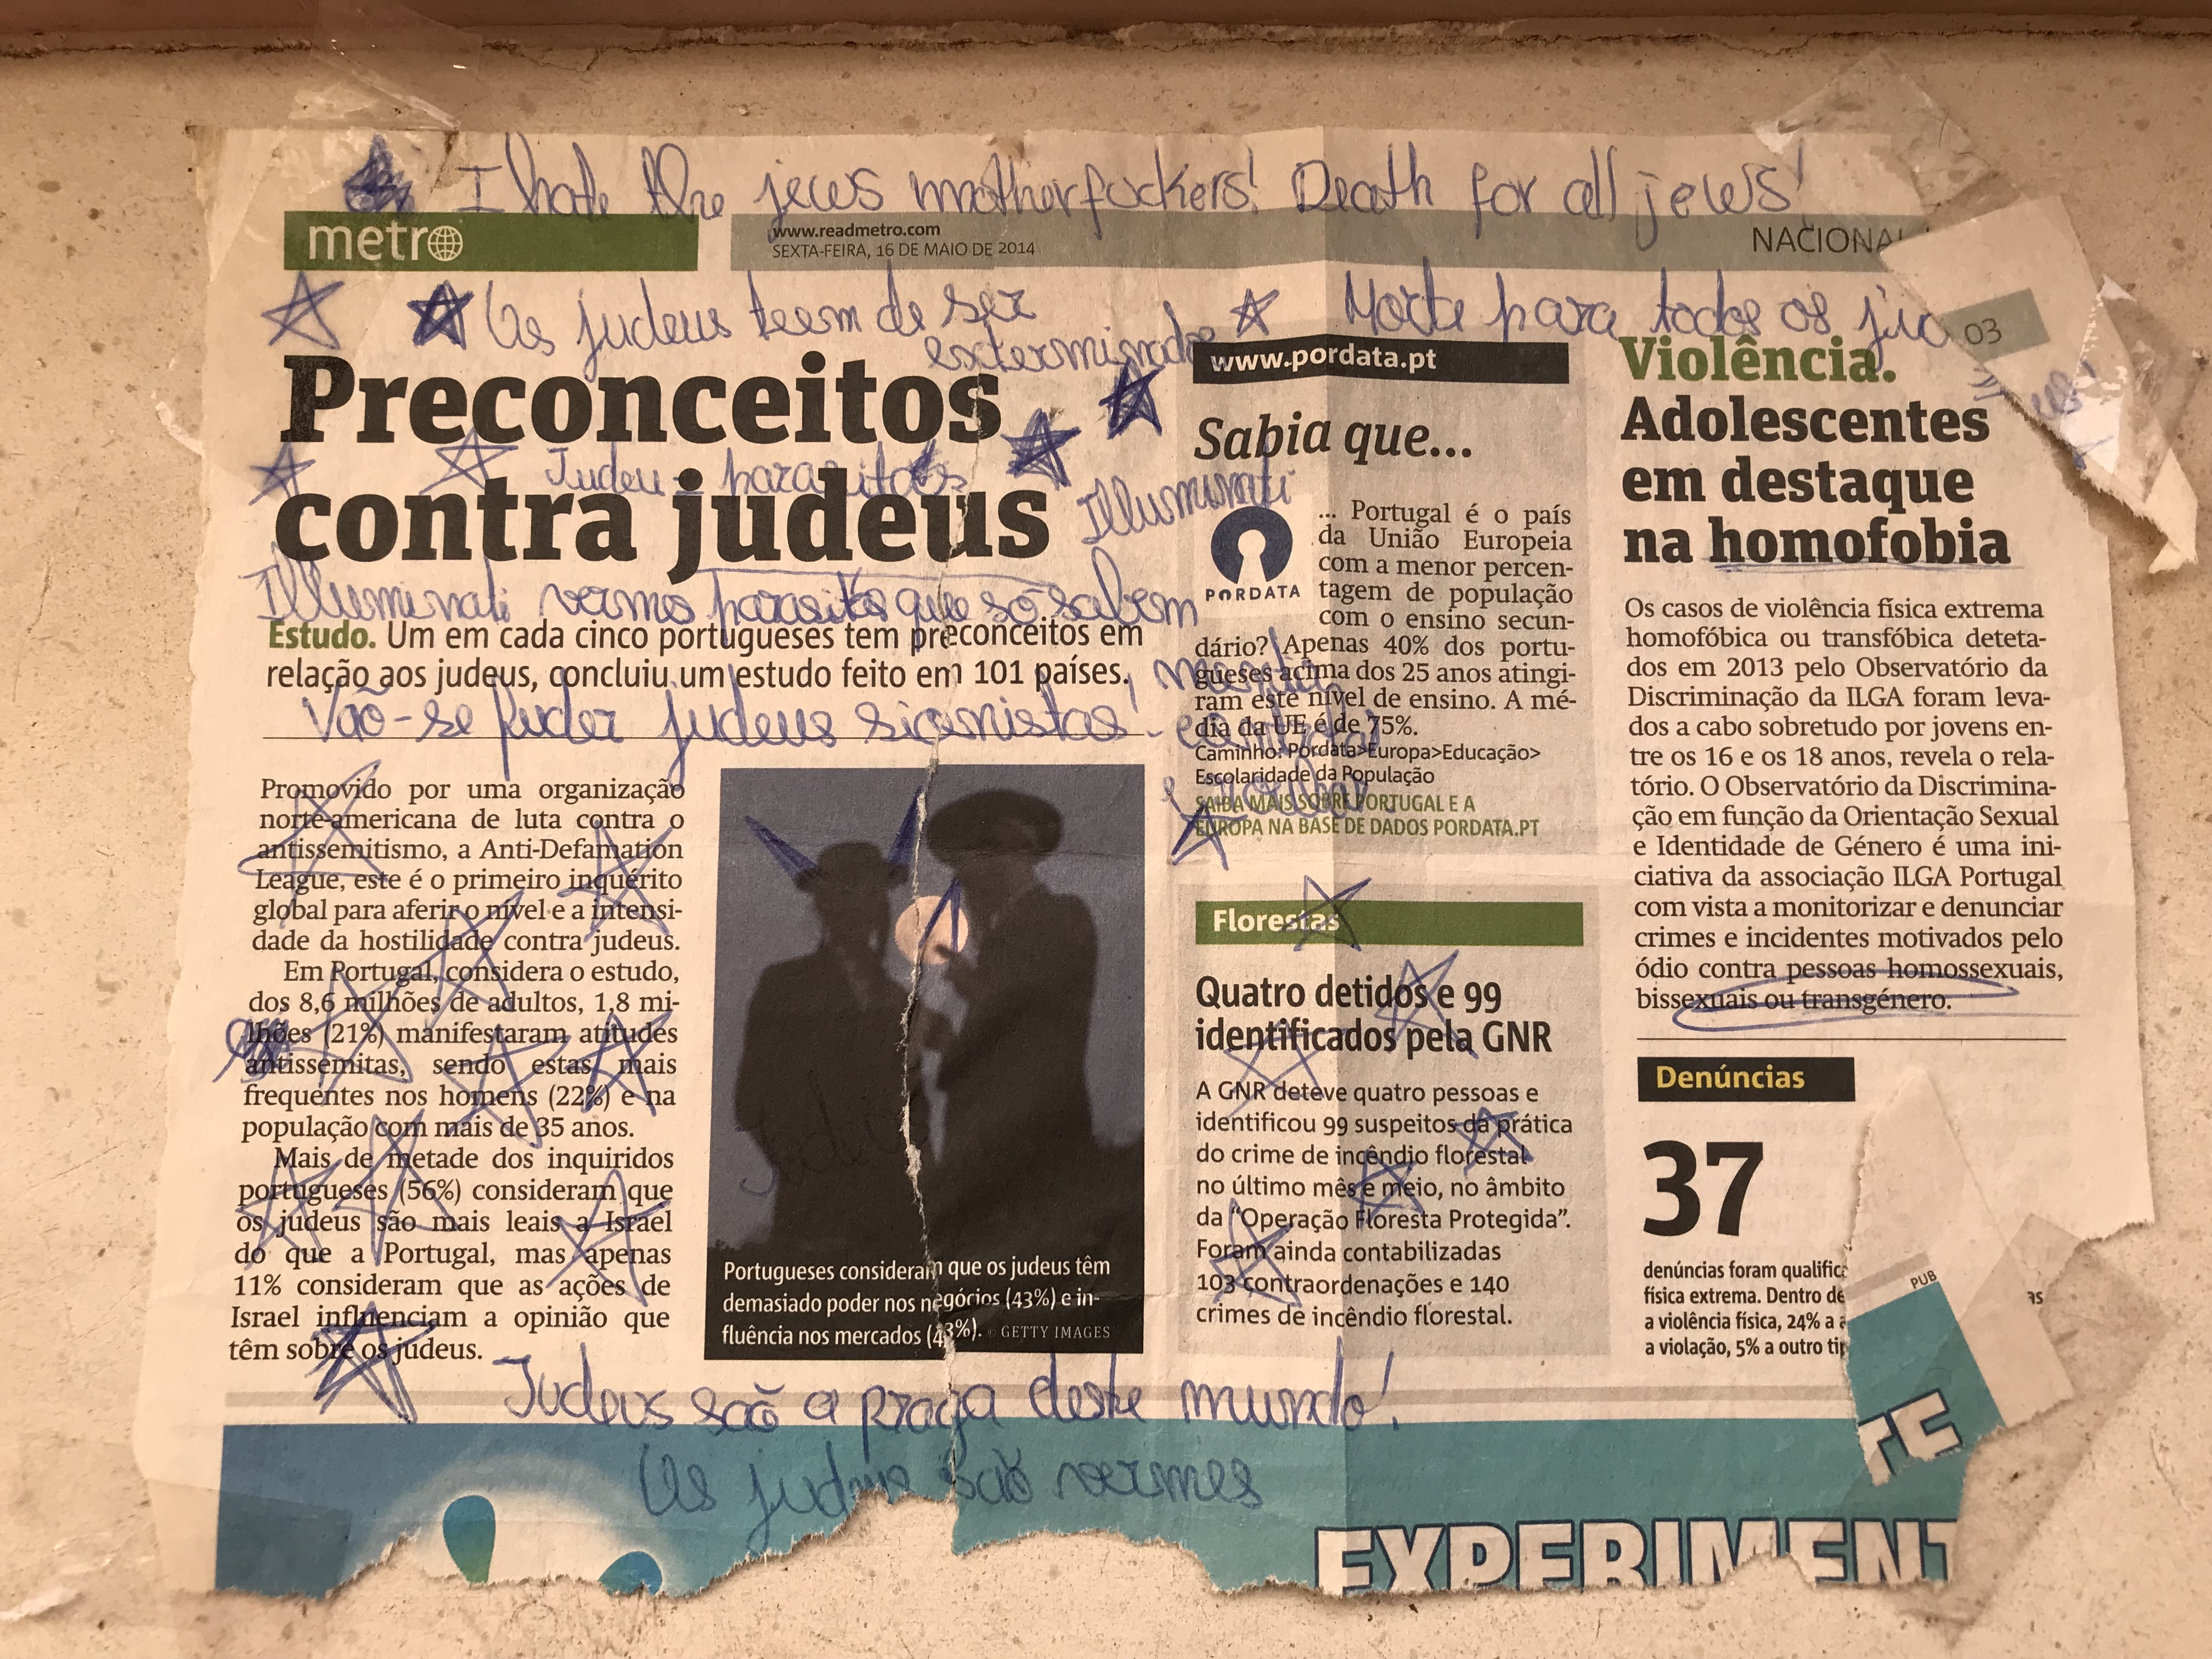 The Jewish Community of Oporto lodged a criminal complaint with the Prosecutor General’s Office